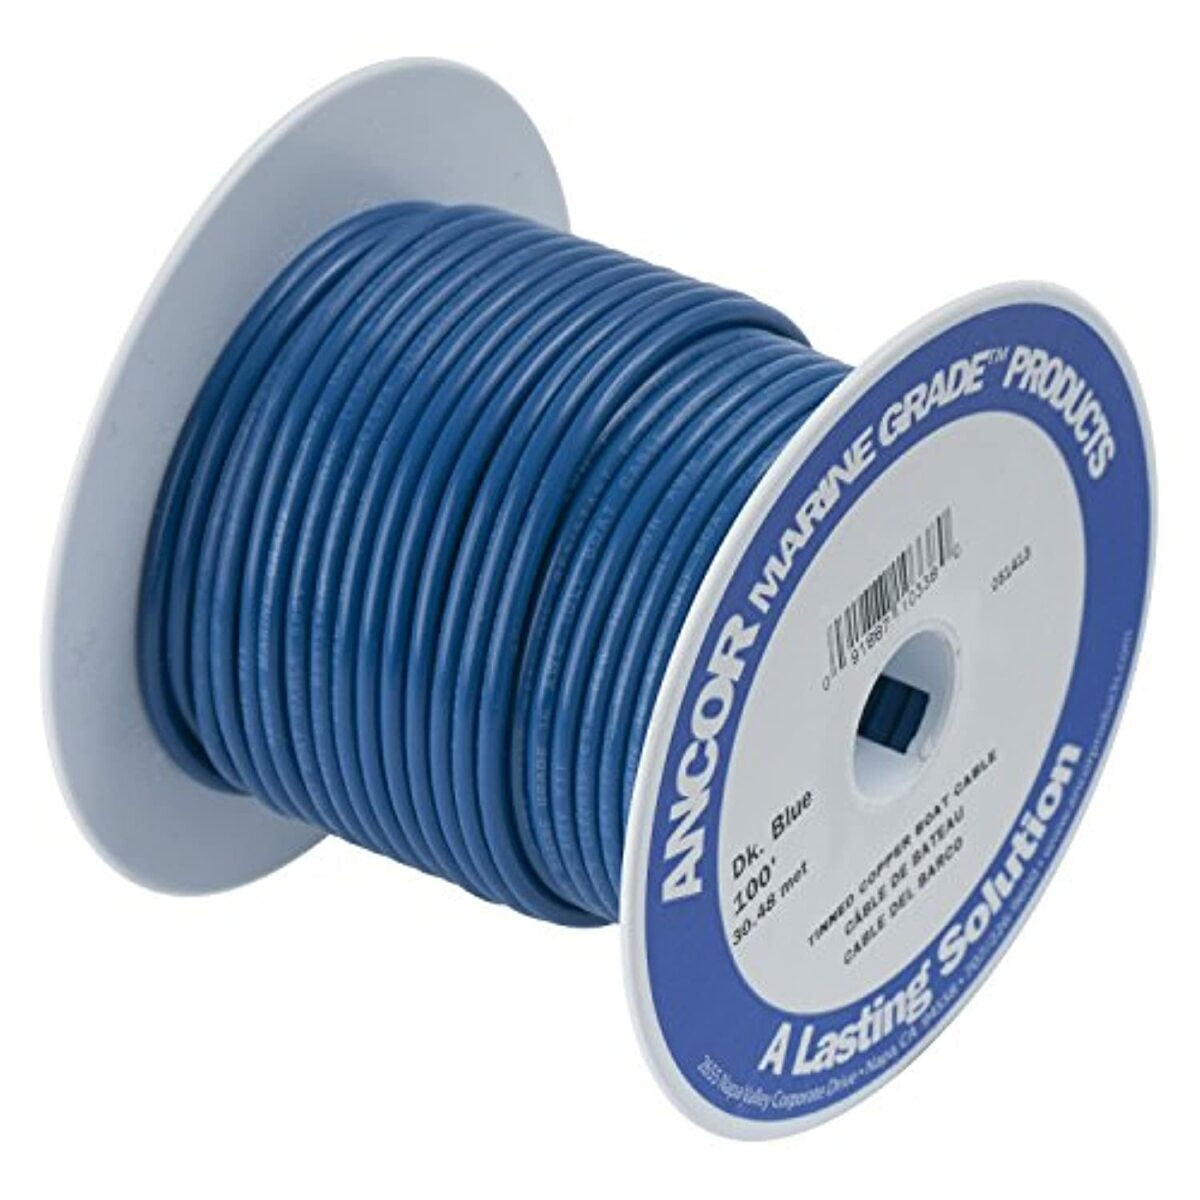 Primary Tracer Marine Tinned Copper 16 Gauge AWG x 100 FT Spool